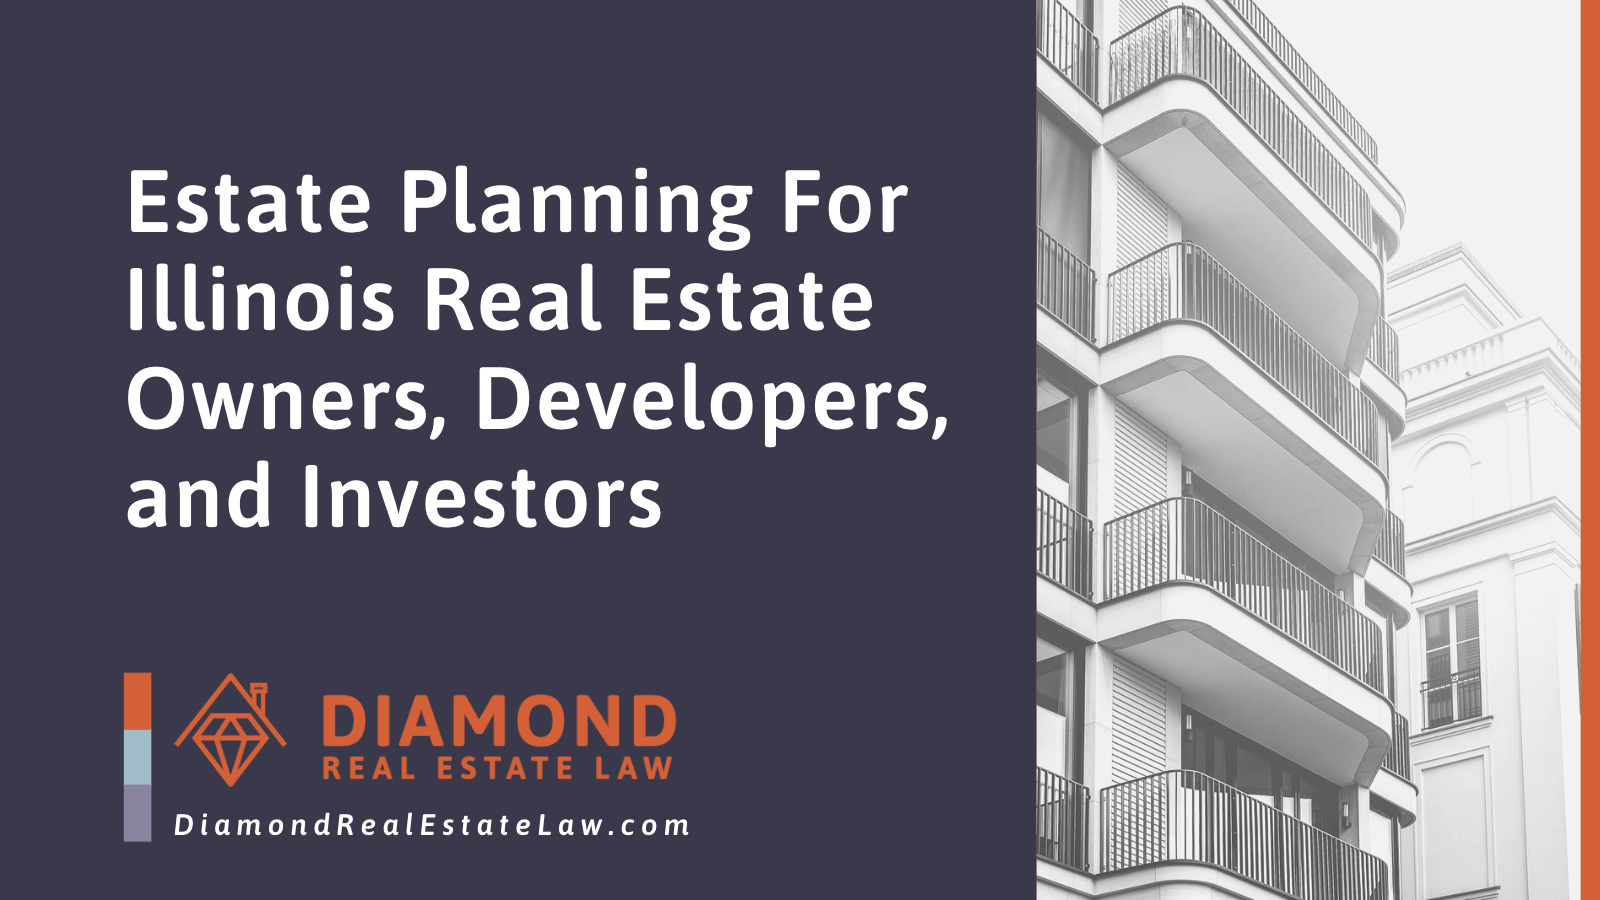 Estate Planning For Illinois Real Estate Owners, Developers, and Investors - Diamond Real Estate Law | McHenry, IL Residential Real Estate Lawyer